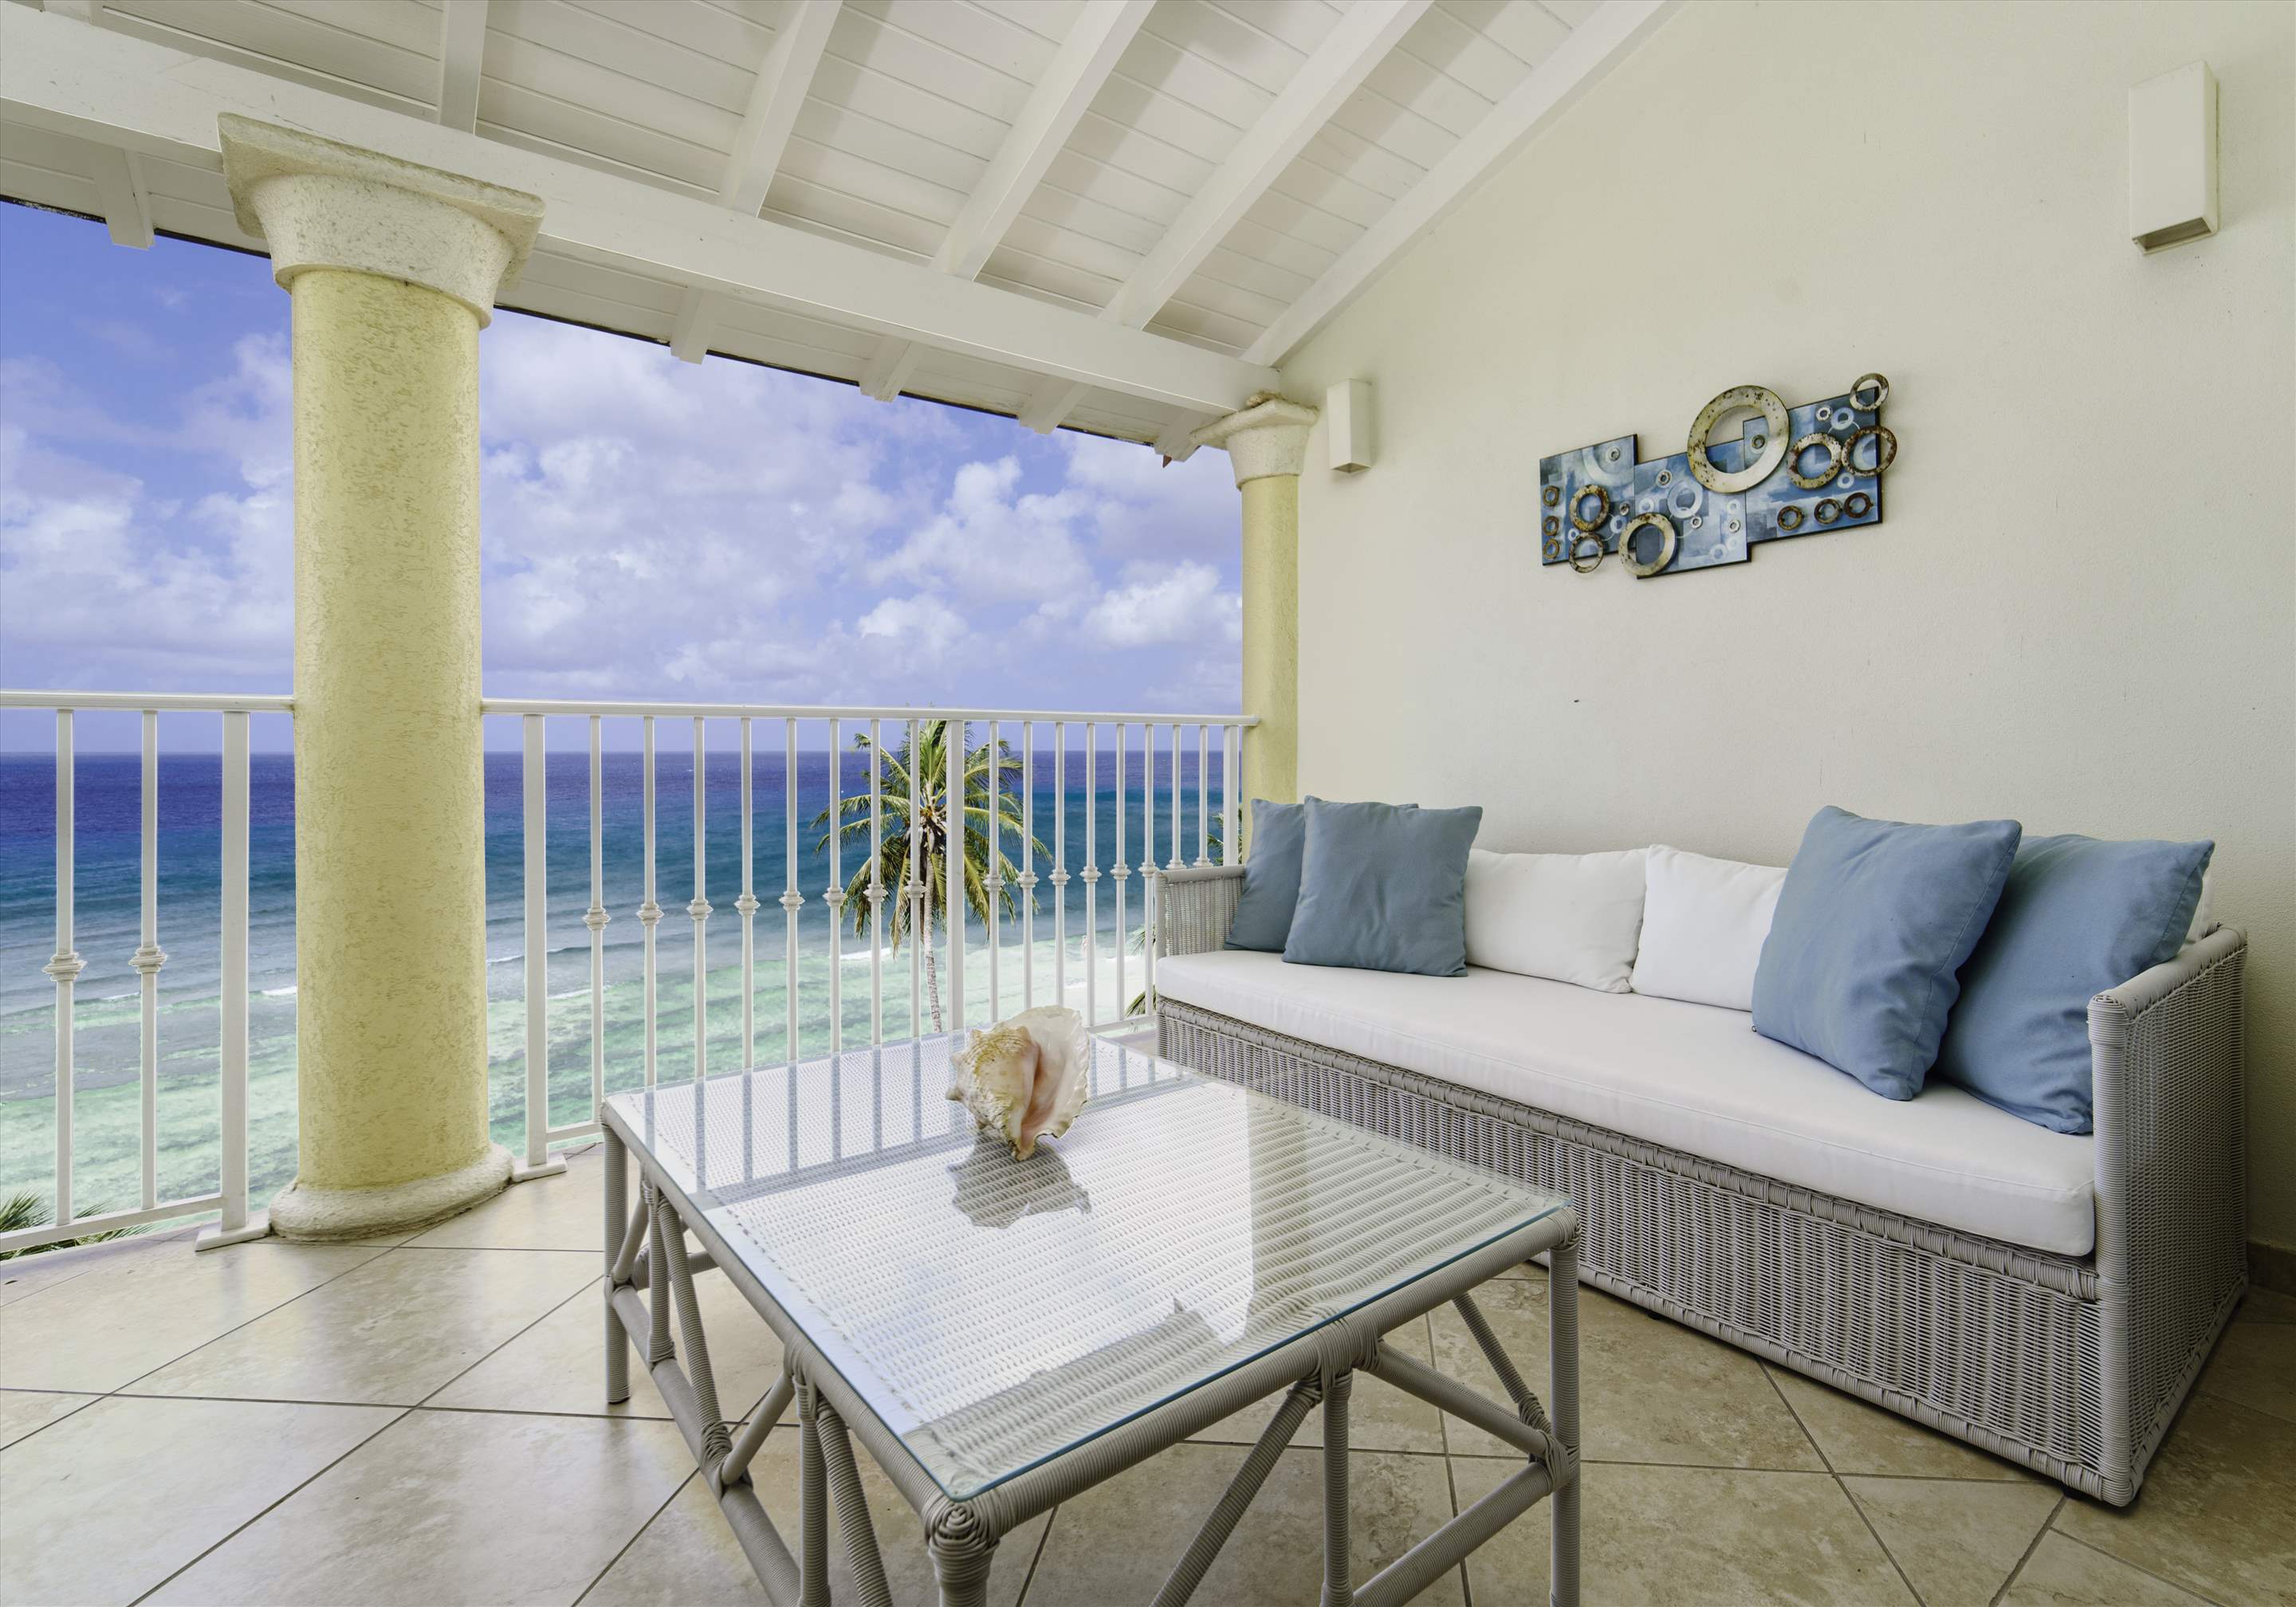 Sapphire Beach 517, 2 bedroom, 3 bedroom apartment in St. Lawrence Gap & South Coast, Barbados Photo #2